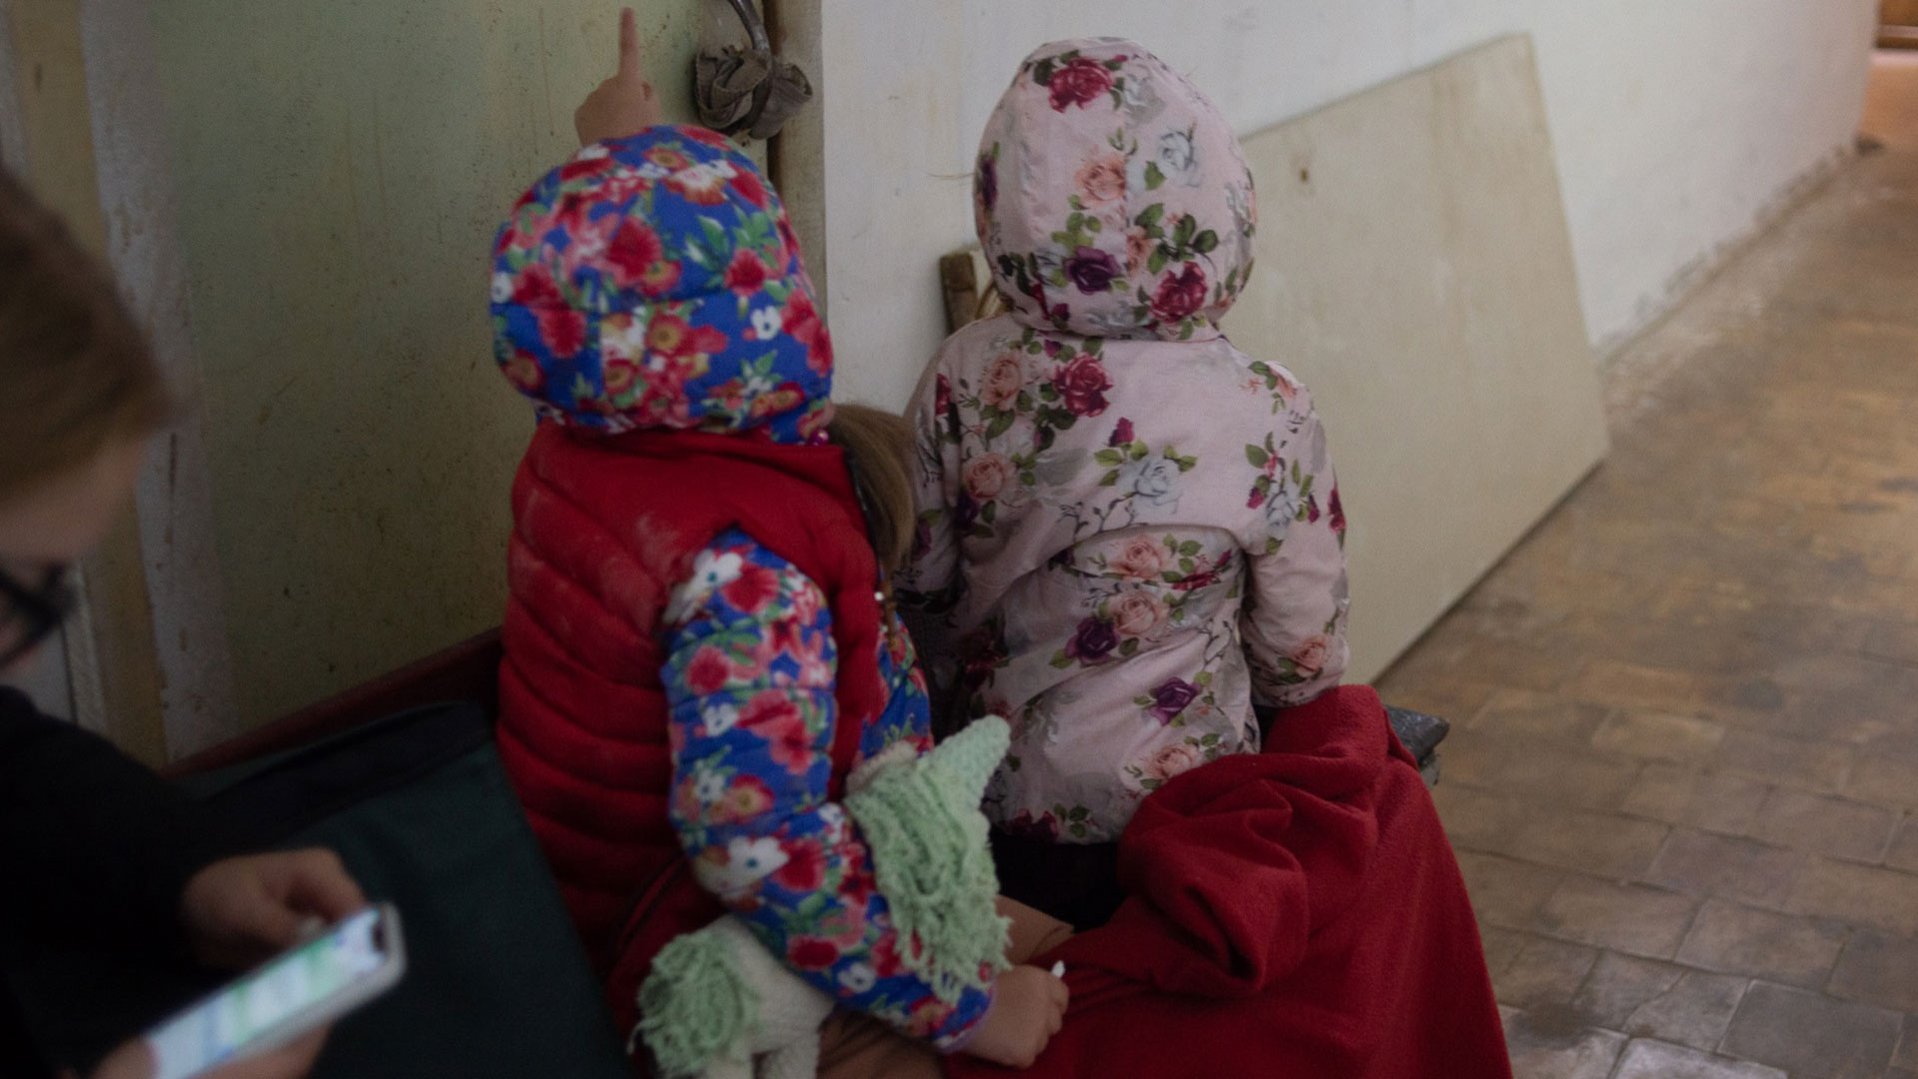 A new wave of missiles and rockets descended on Ukraine, causing hundreds of children and families to seek shelter | War Child